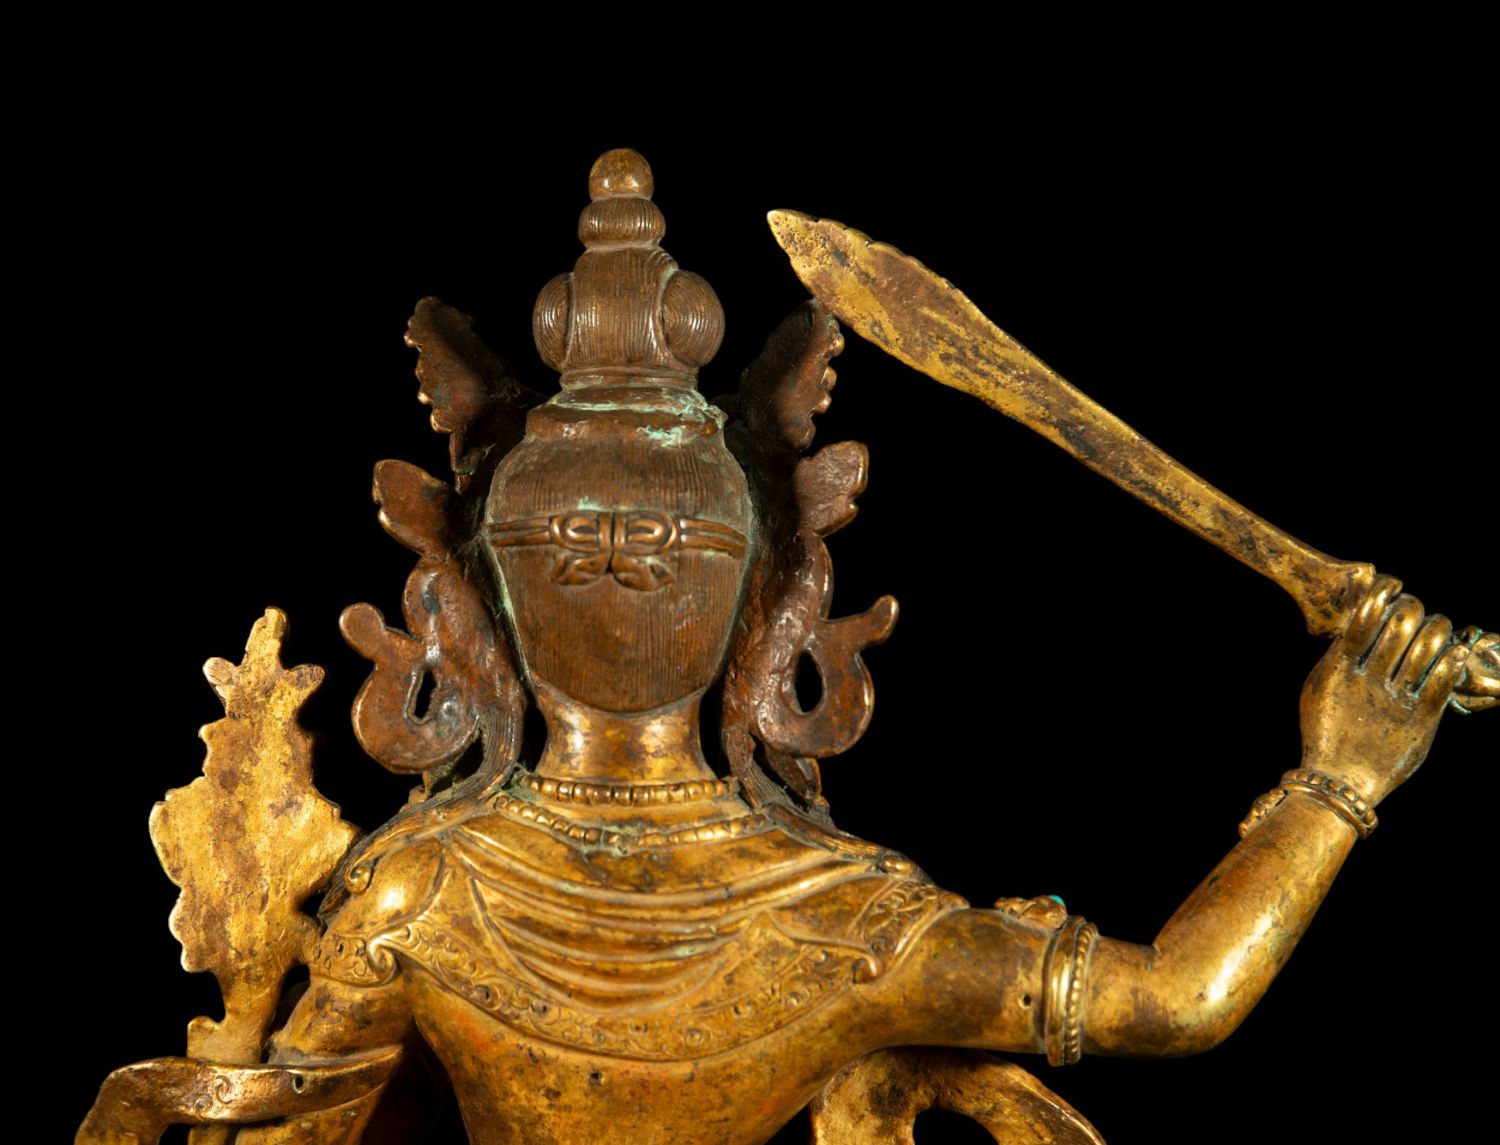 Exquisite Goddess Tara in gilt repoussé copper, Chinese school, Tibet, 19th century - Image 7 of 8